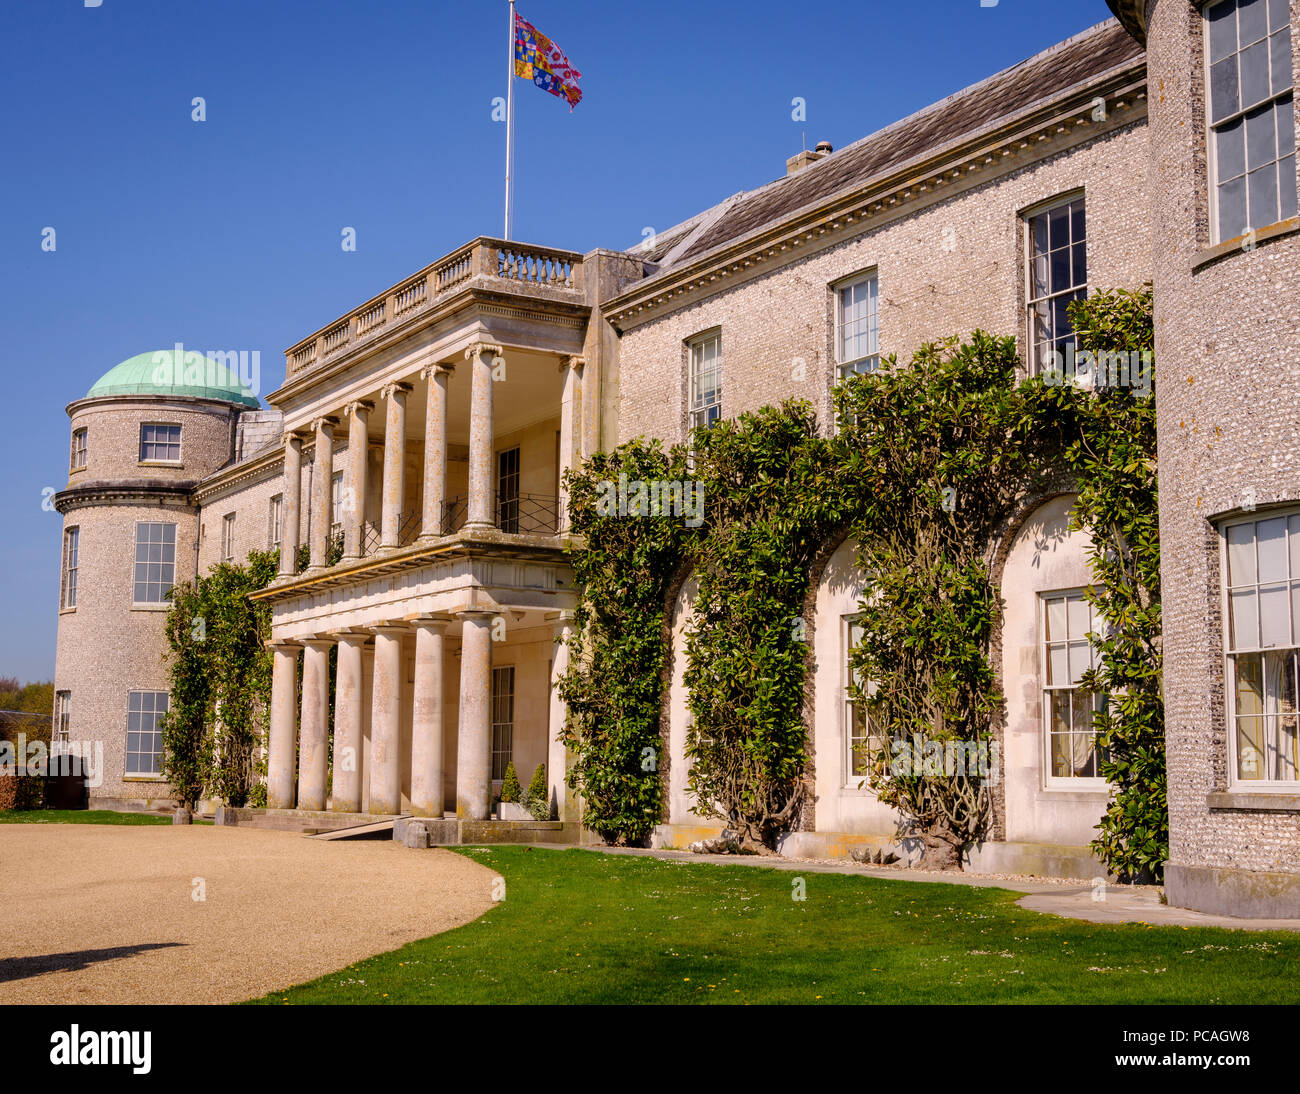 Goodwood House, on the Goodwood Estate, West Sussex UK. Stock Photo